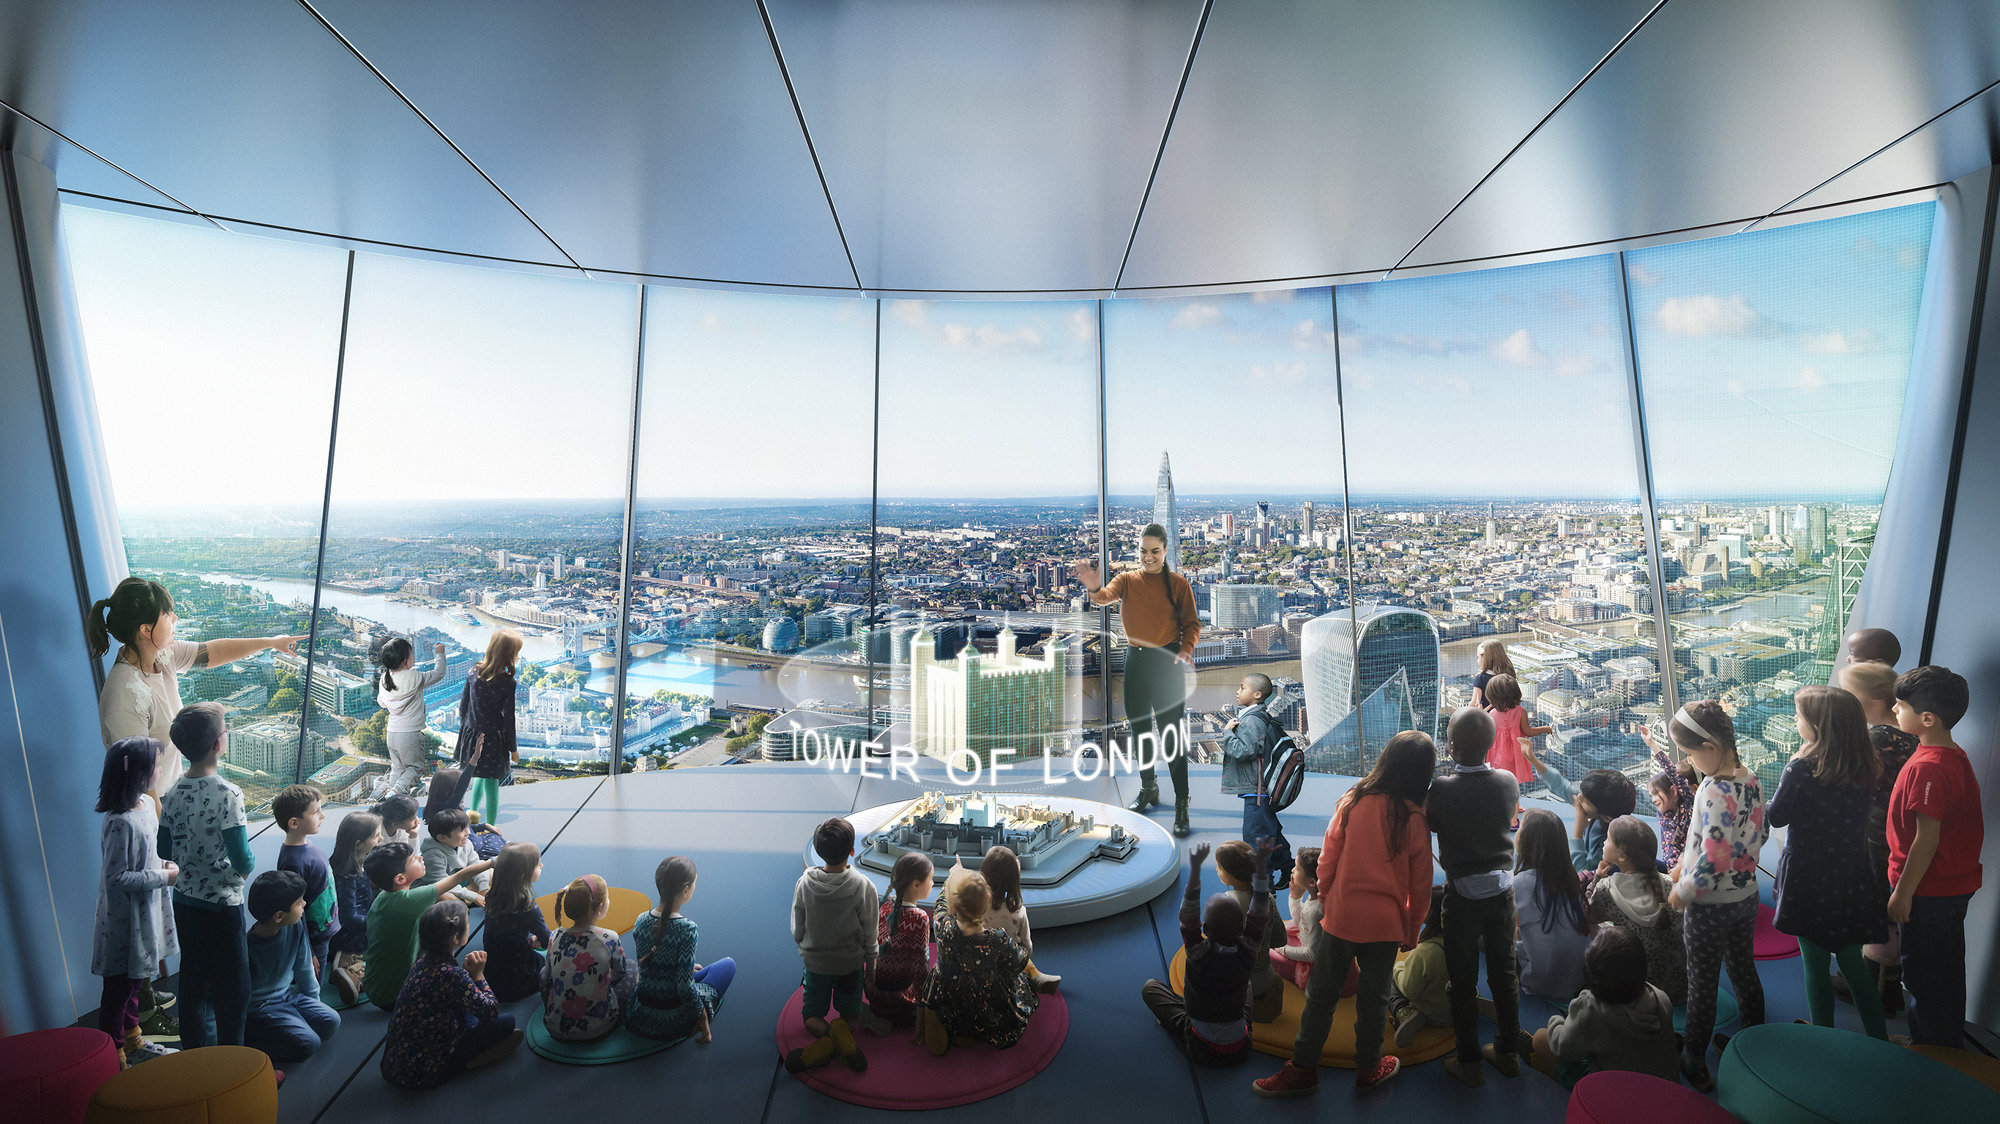 The Tulip: A New Public Cultural And Tourist Attraction Proposed For The City Of London